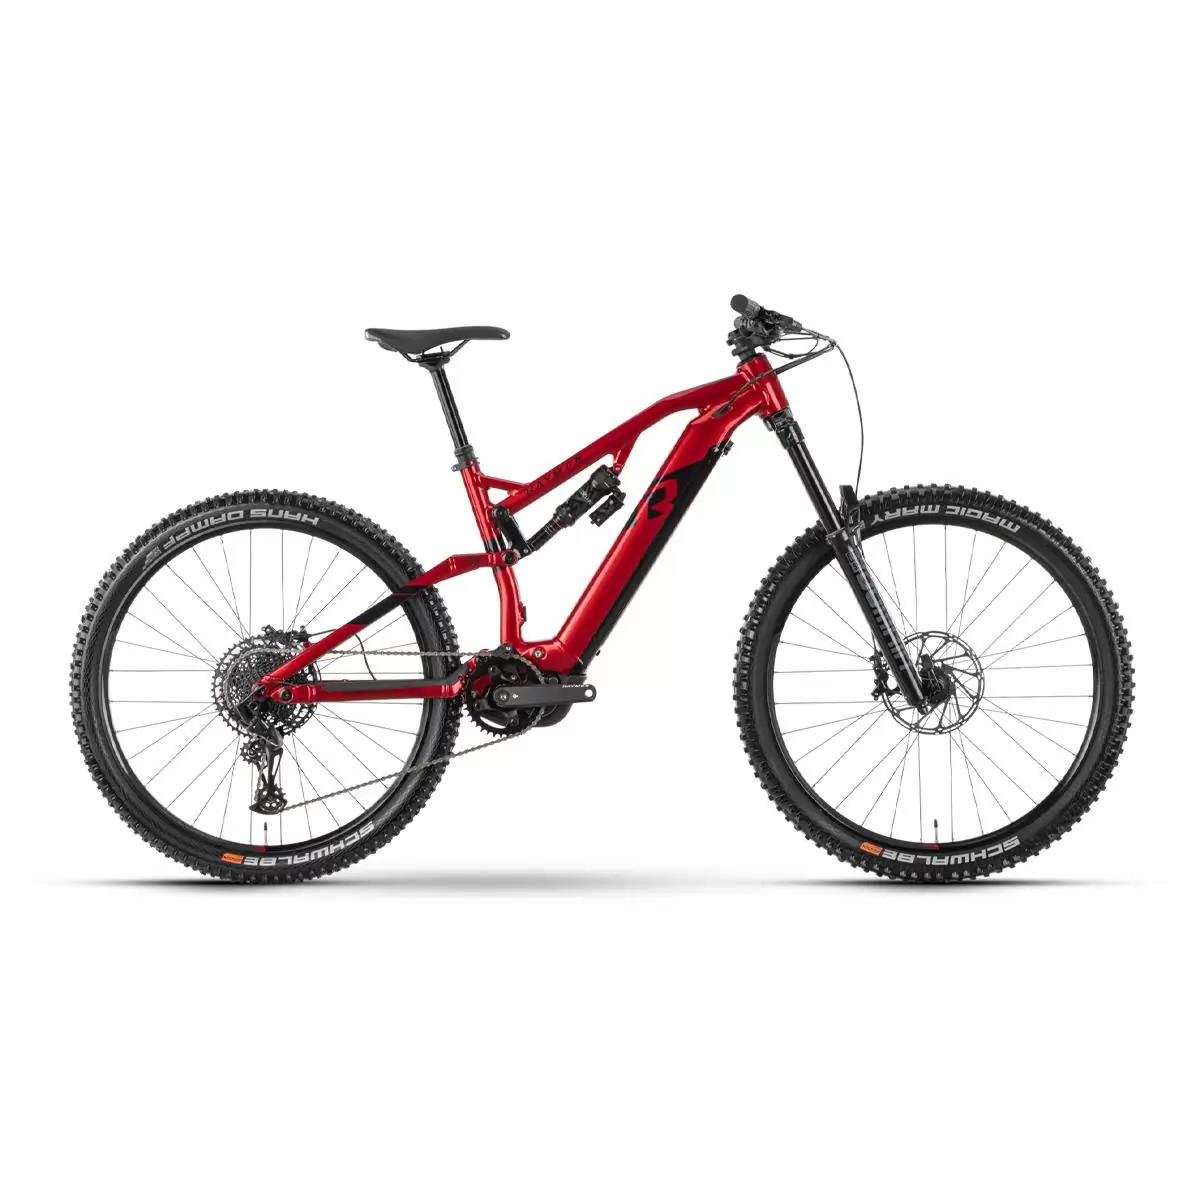 TrailRay 160E 10.0 29'' 170mm 12s 720Wh Yamaha PW-X3 Red/Black Size S #1